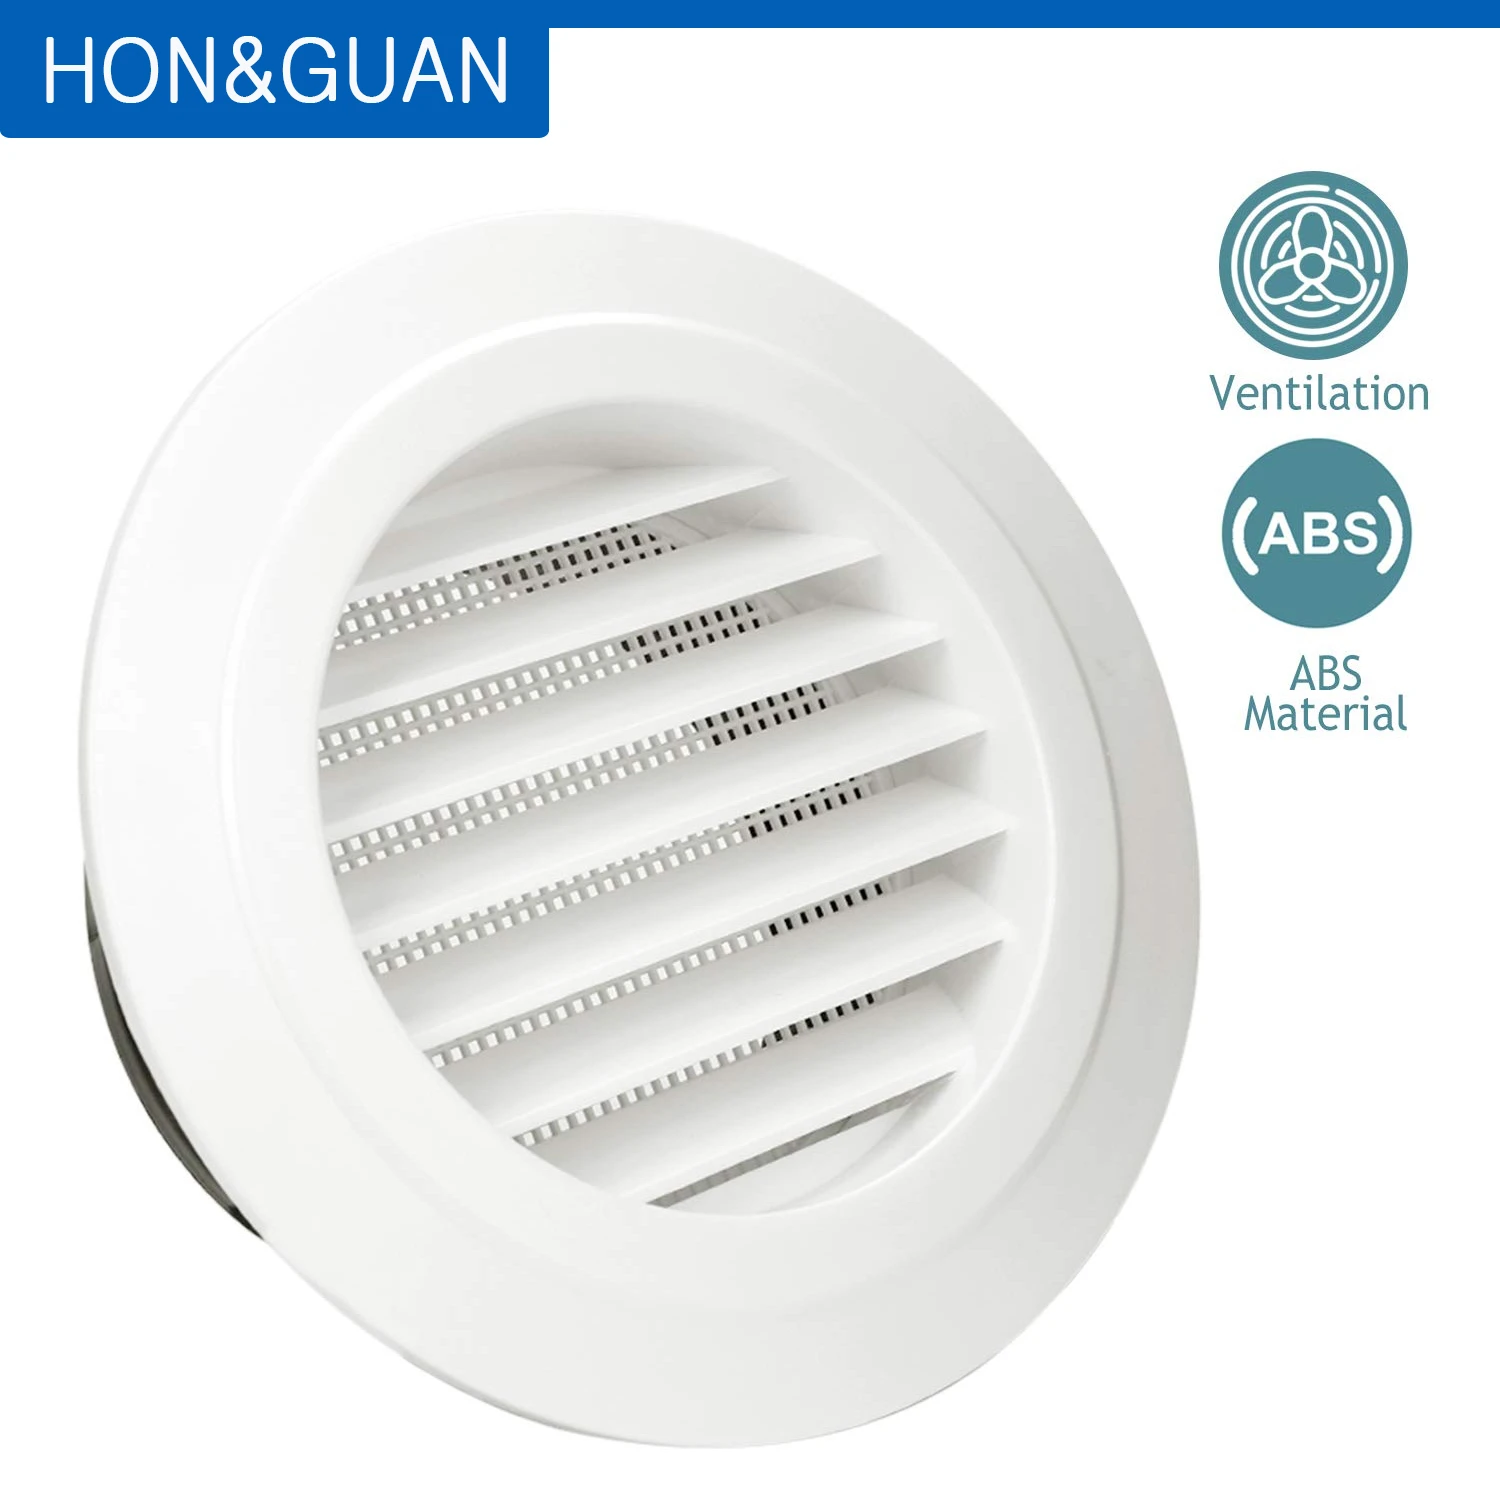 Air Vent Grille 340mm x 340mm with Fly Screen Ducting Cover Grid 13.4"